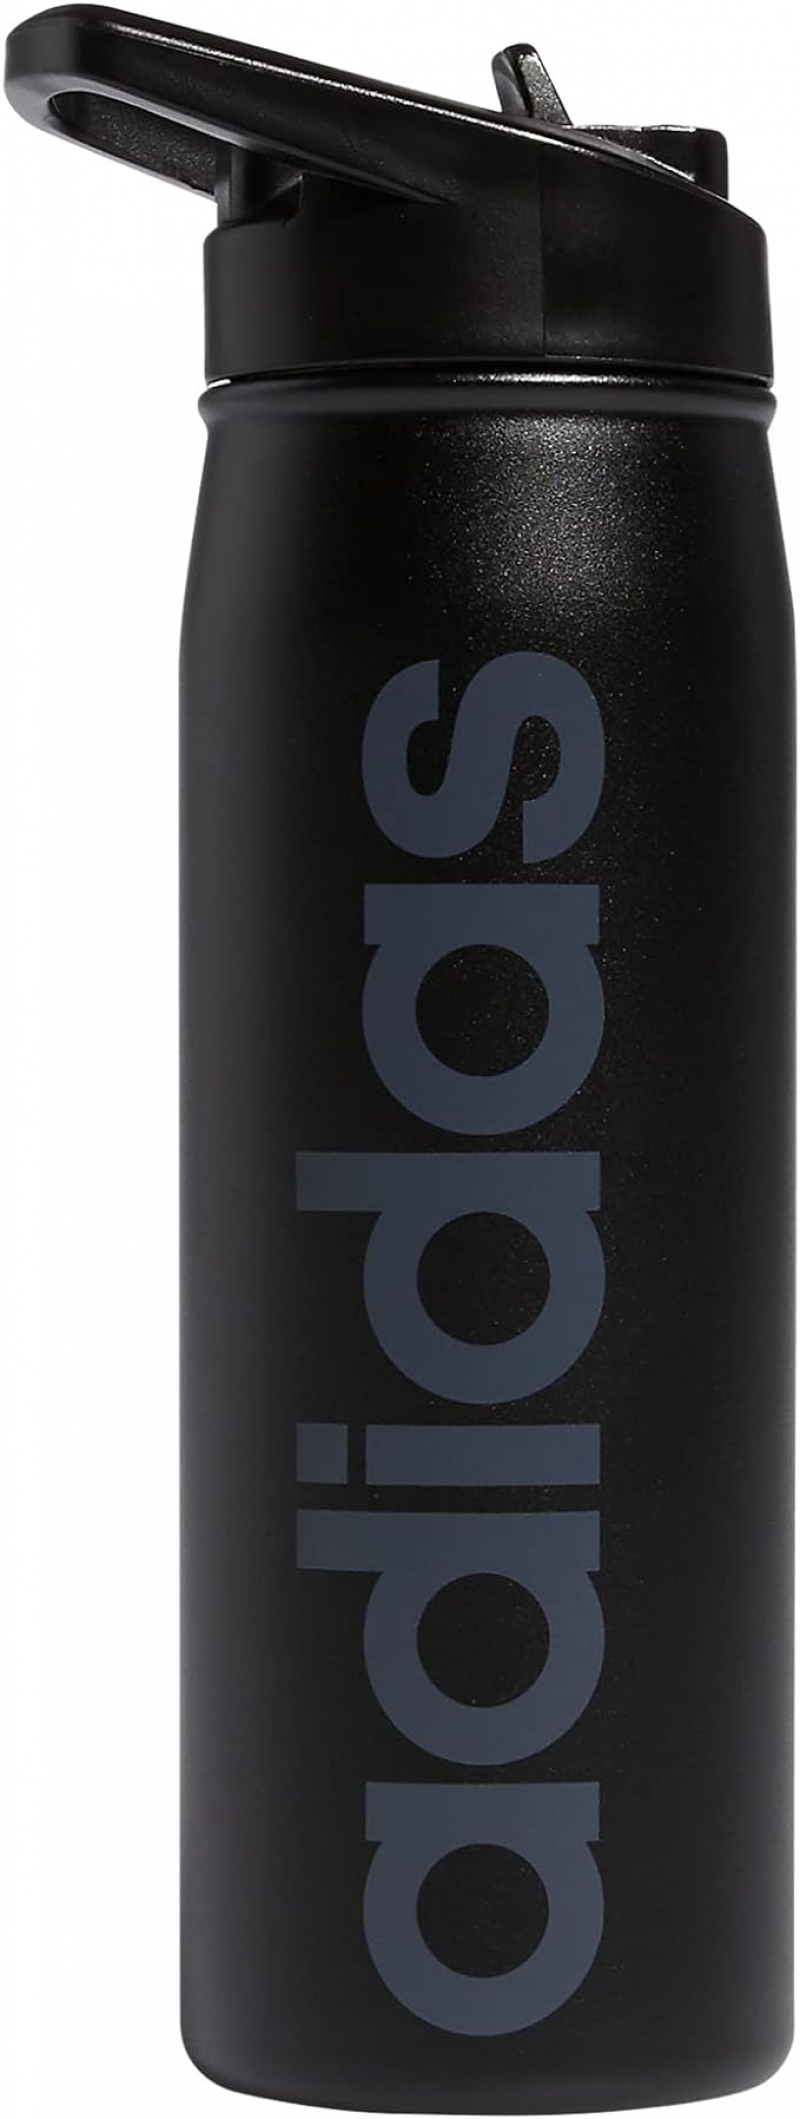 ihocon: adidas 600 ML (20 oz) Straw Top Metal Water Bottle, Hot/Cold Double-Walled Insulated 18/8 Stainless Steel  不锈钢保温吸管水瓶